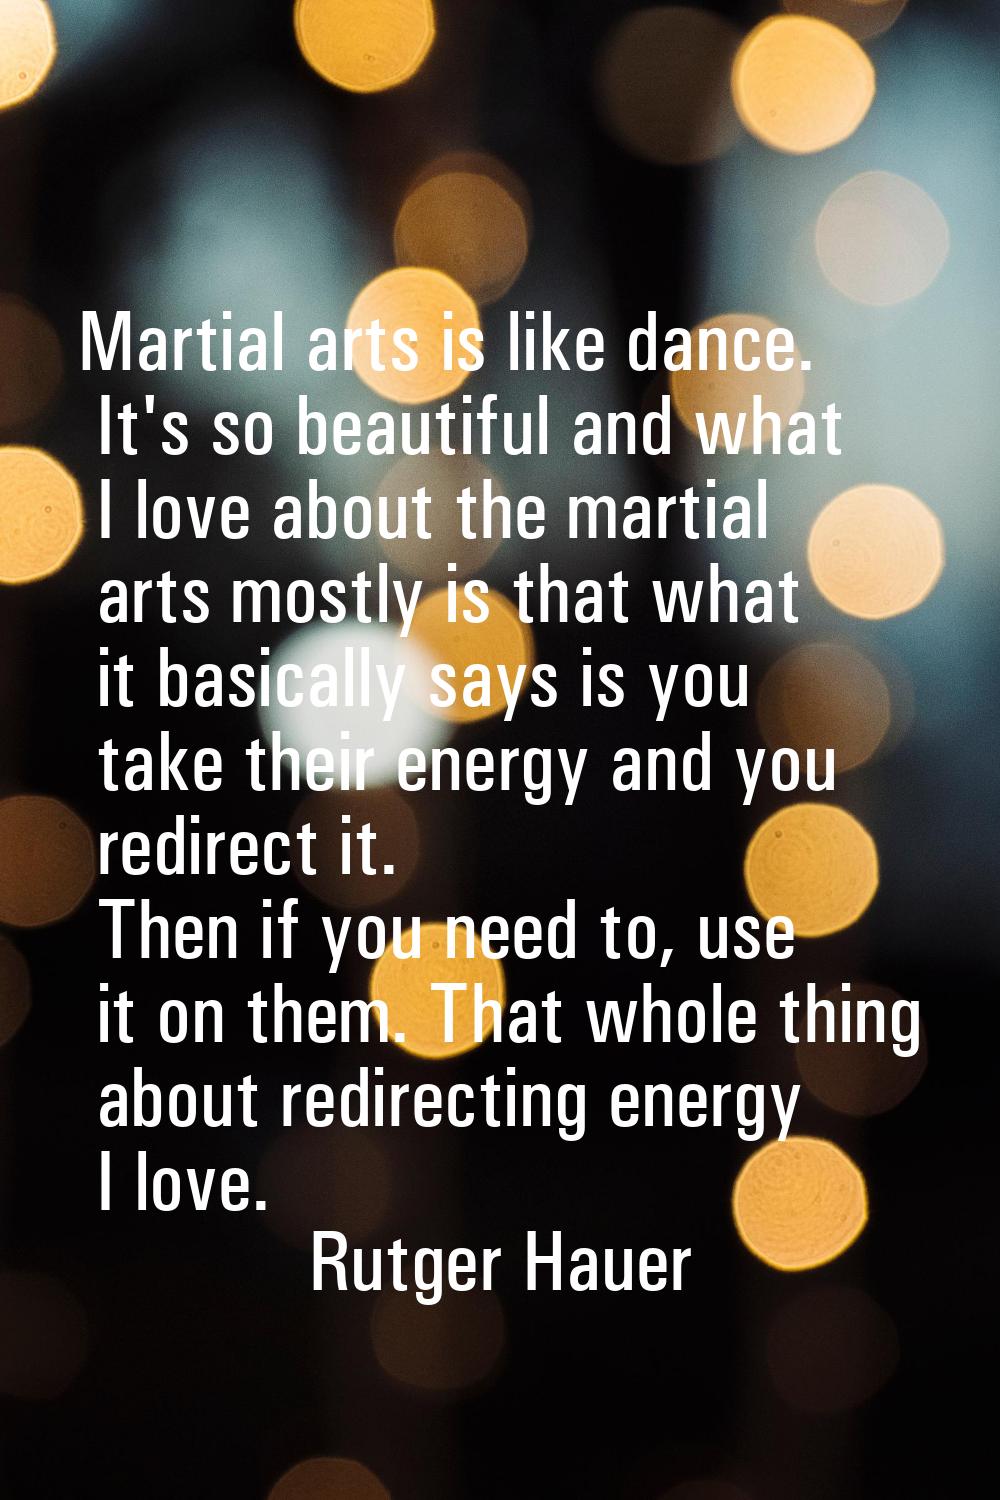 Martial arts is like dance. It's so beautiful and what I love about the martial arts mostly is that